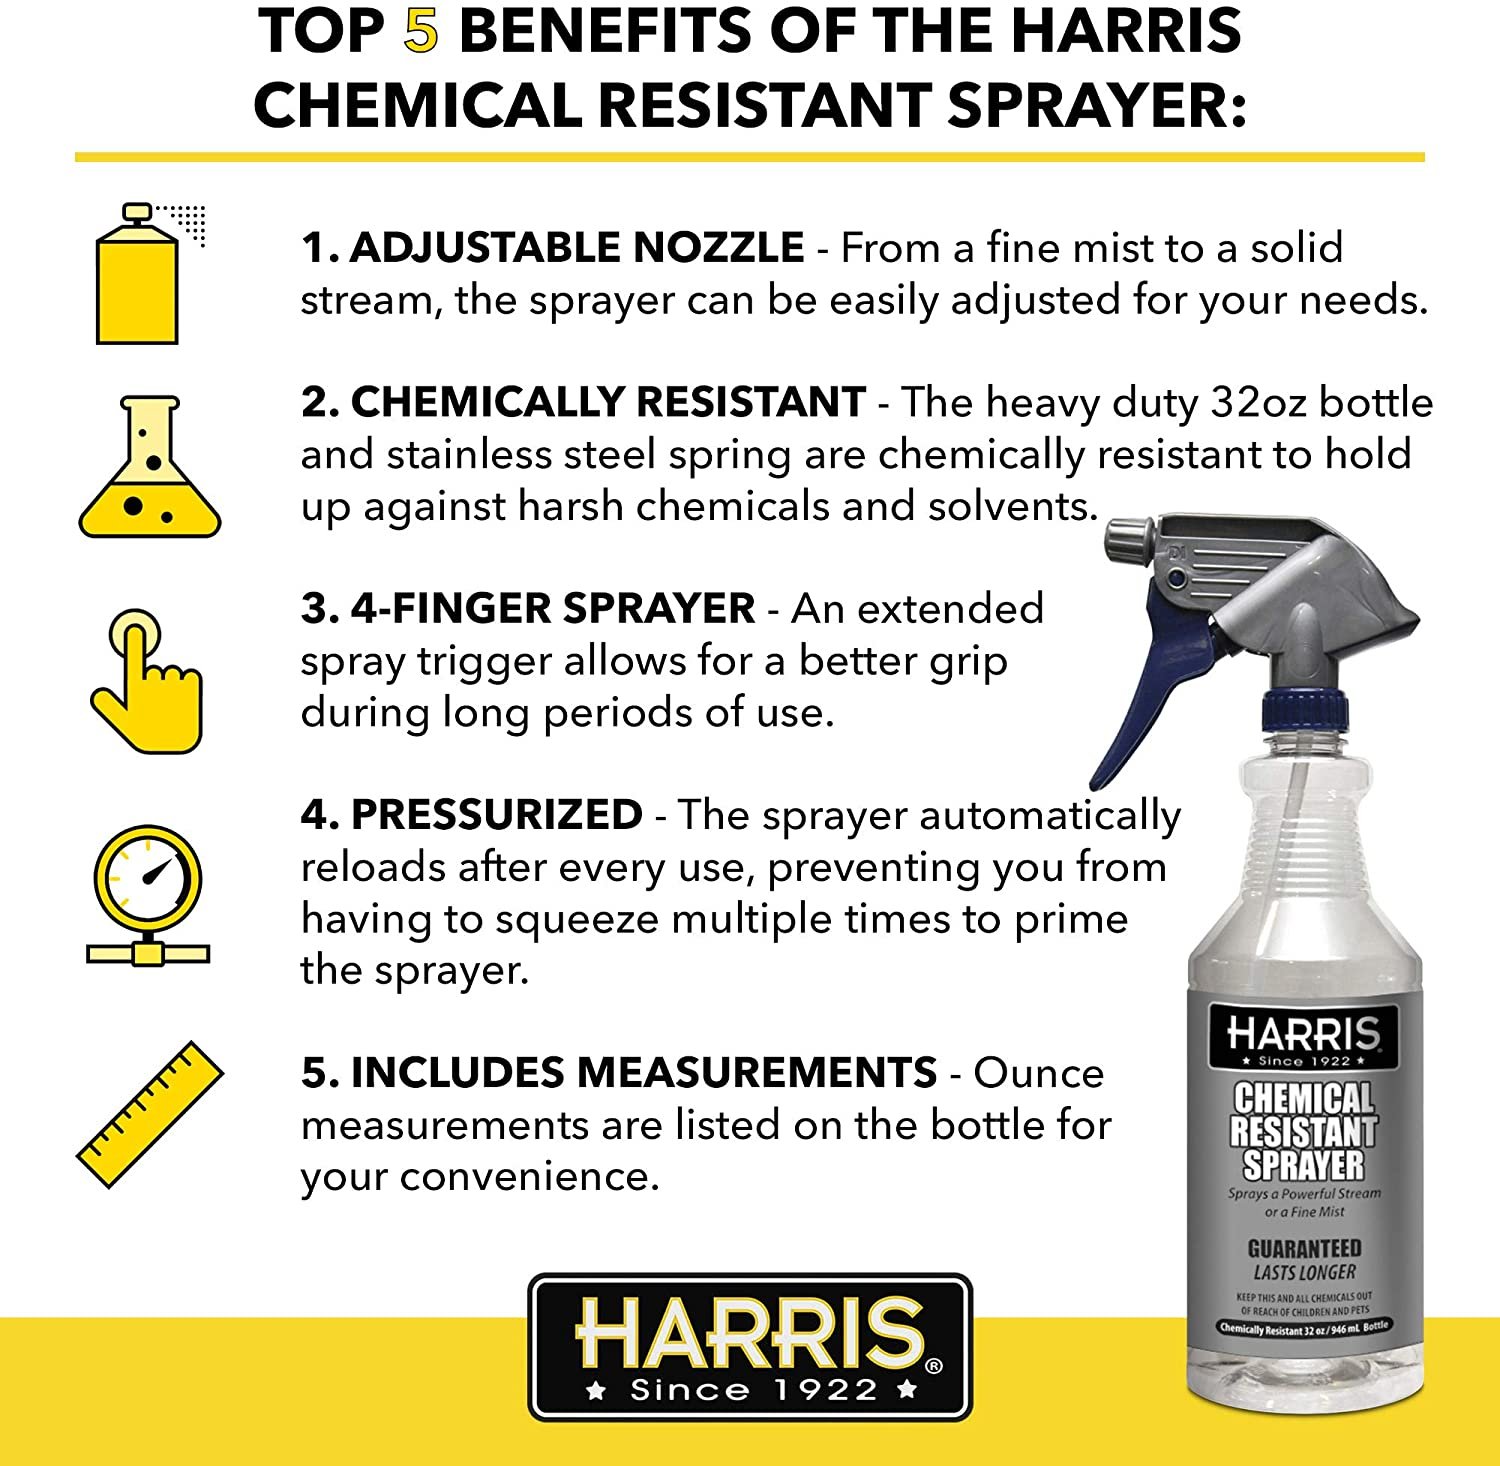 Harris Chemically Resistant Professional Spray Bottle, 32oz (1-Pack)